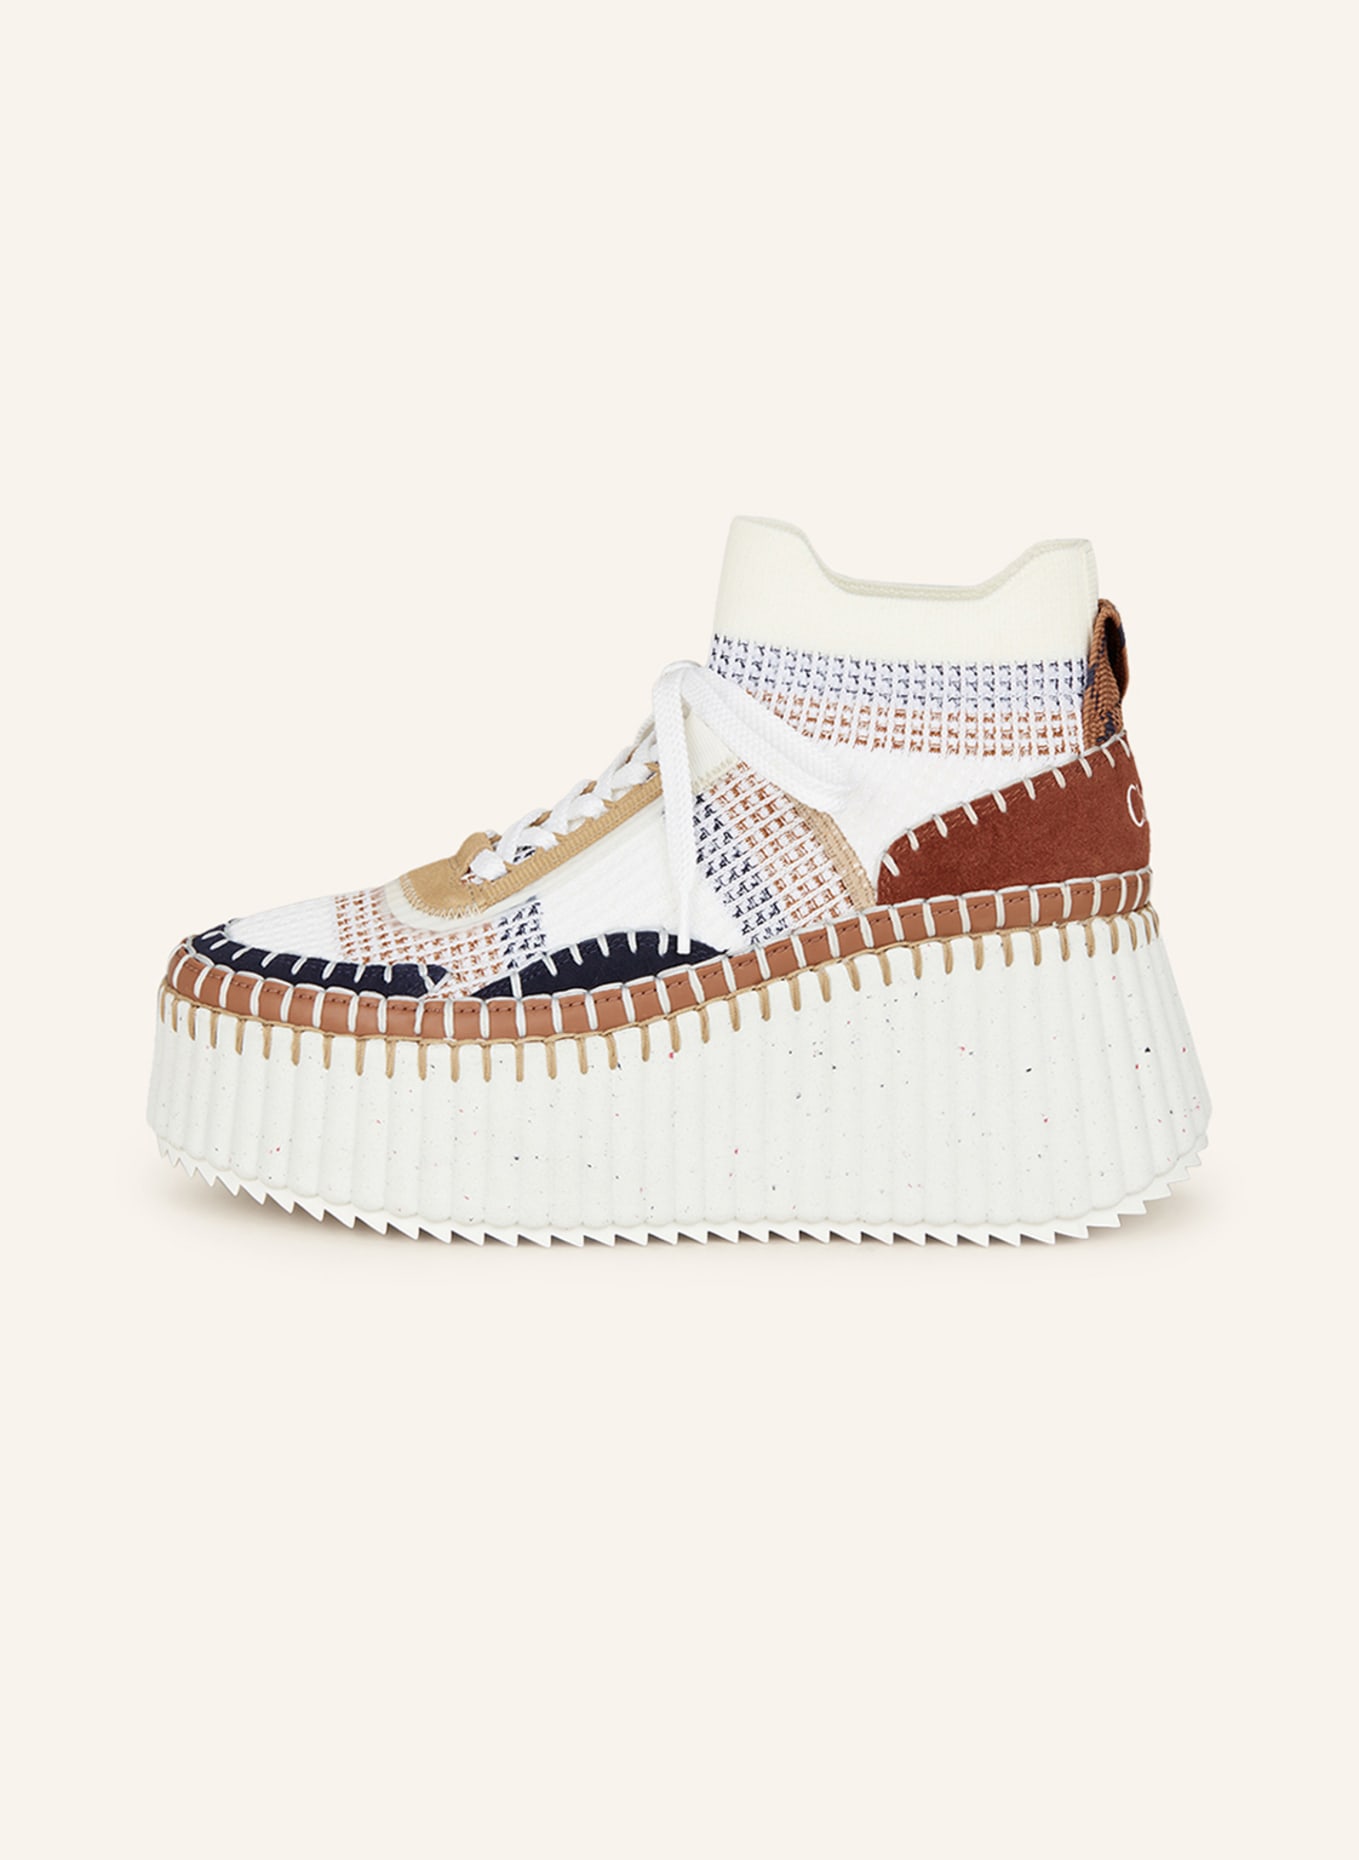 Chloé Hightop sneakers NAMA, Color: BROWN/ WHITE/ BLUE (Image 4)